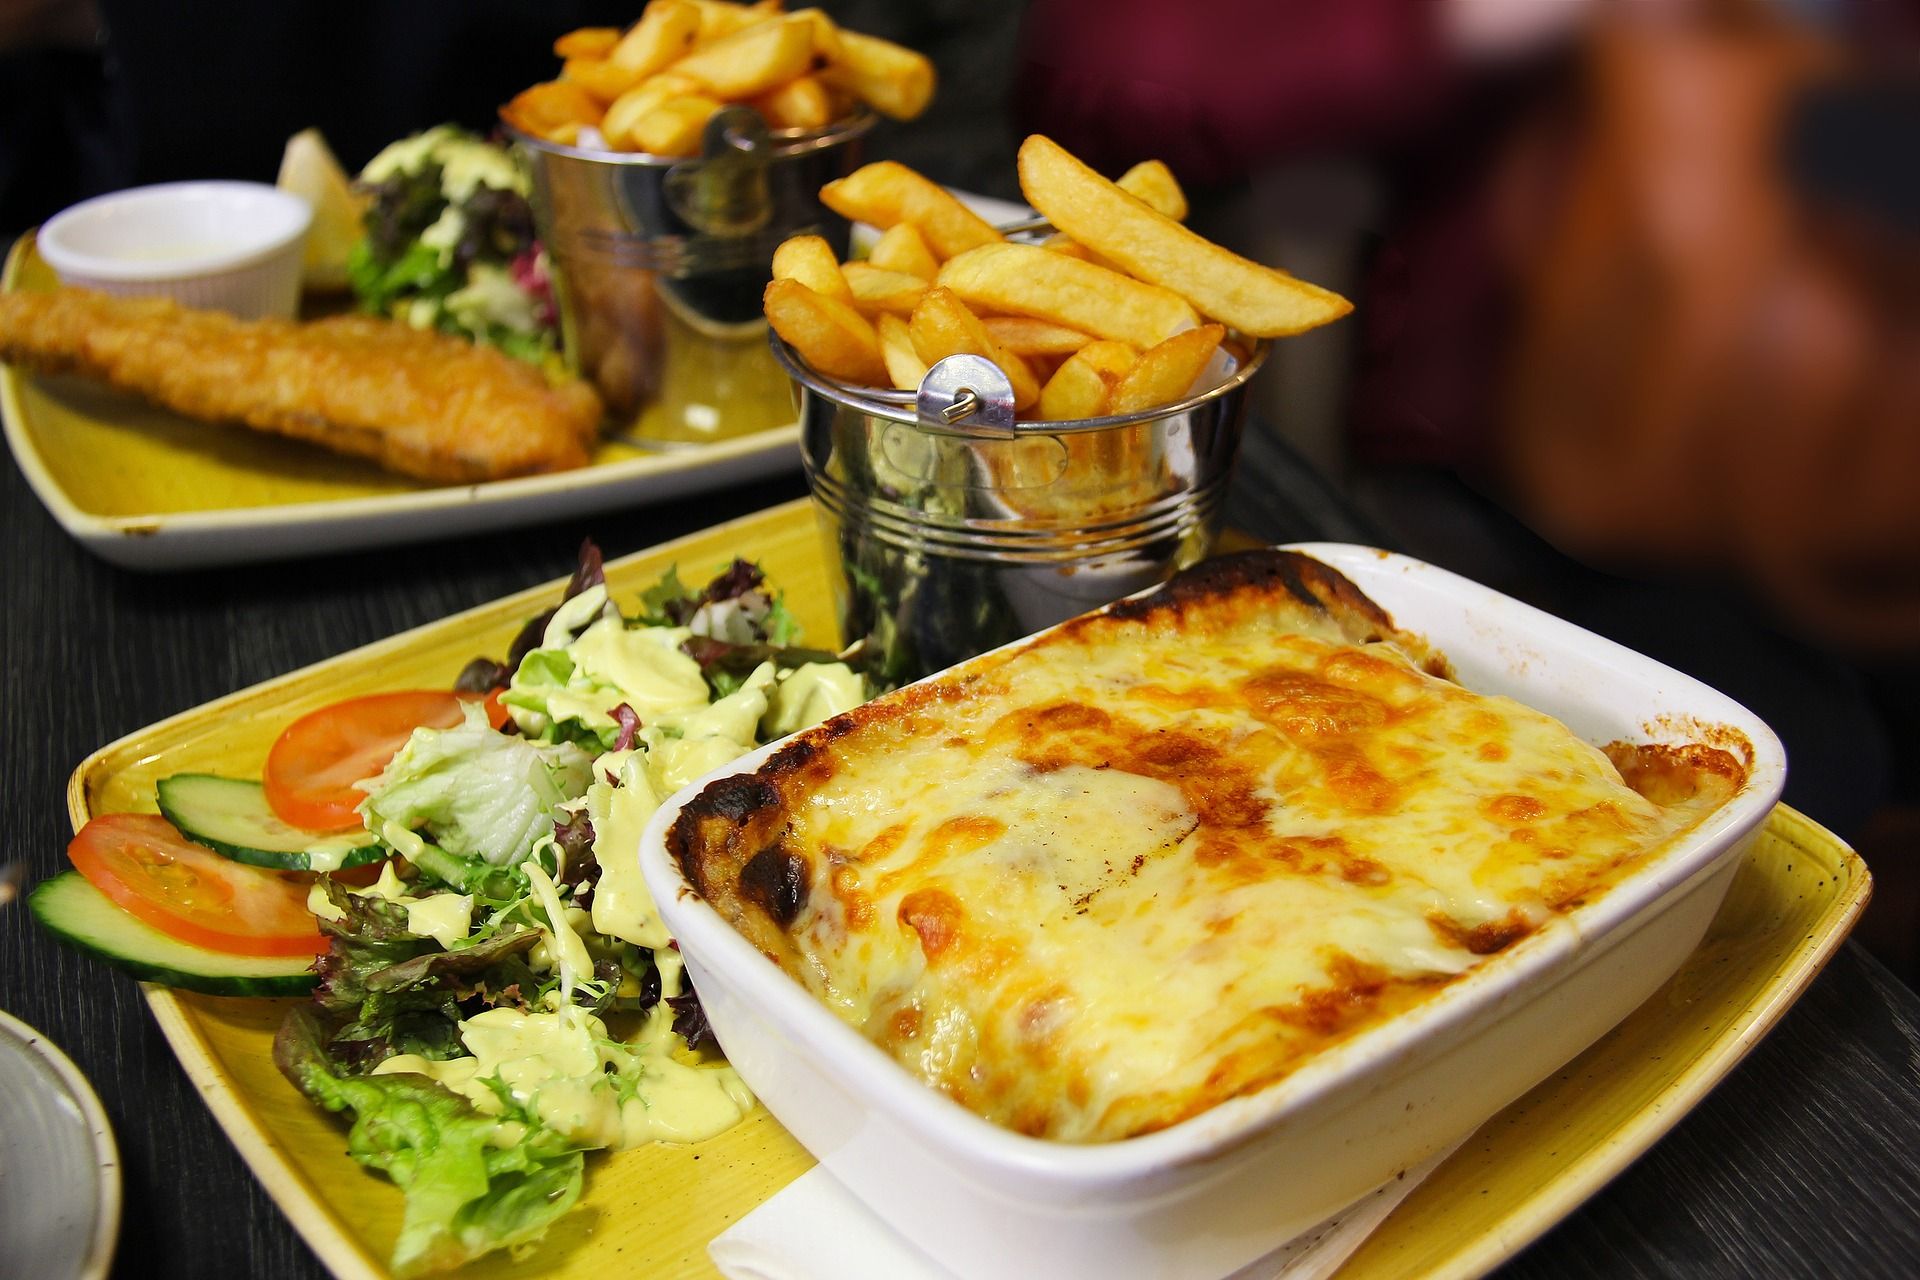 A plate of Irish lasagna with fries